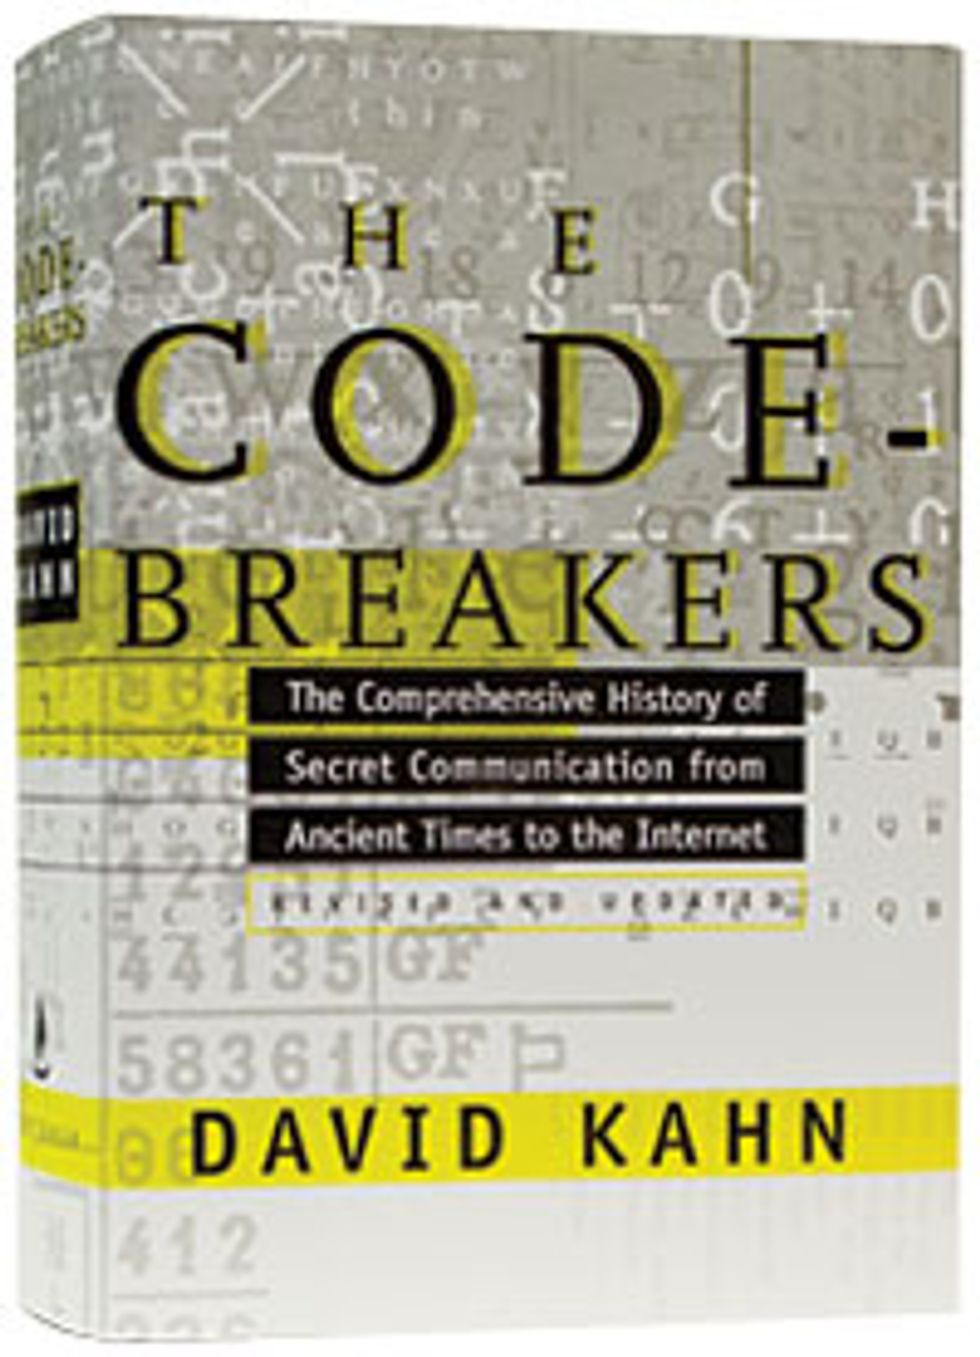 photo of book cover 'The Code-Breakers'